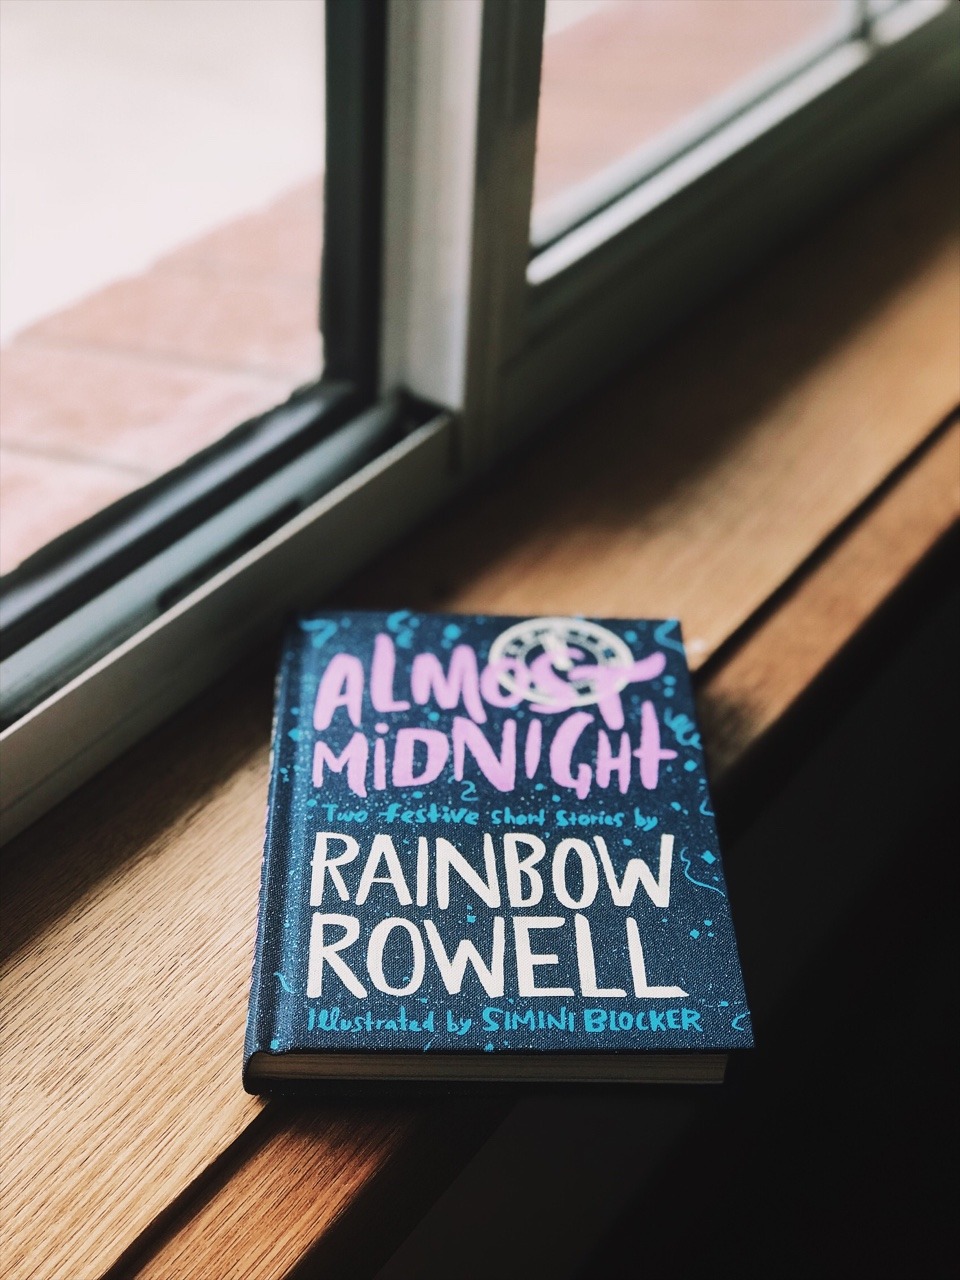 Almost Midnight by Rainbow Rowell